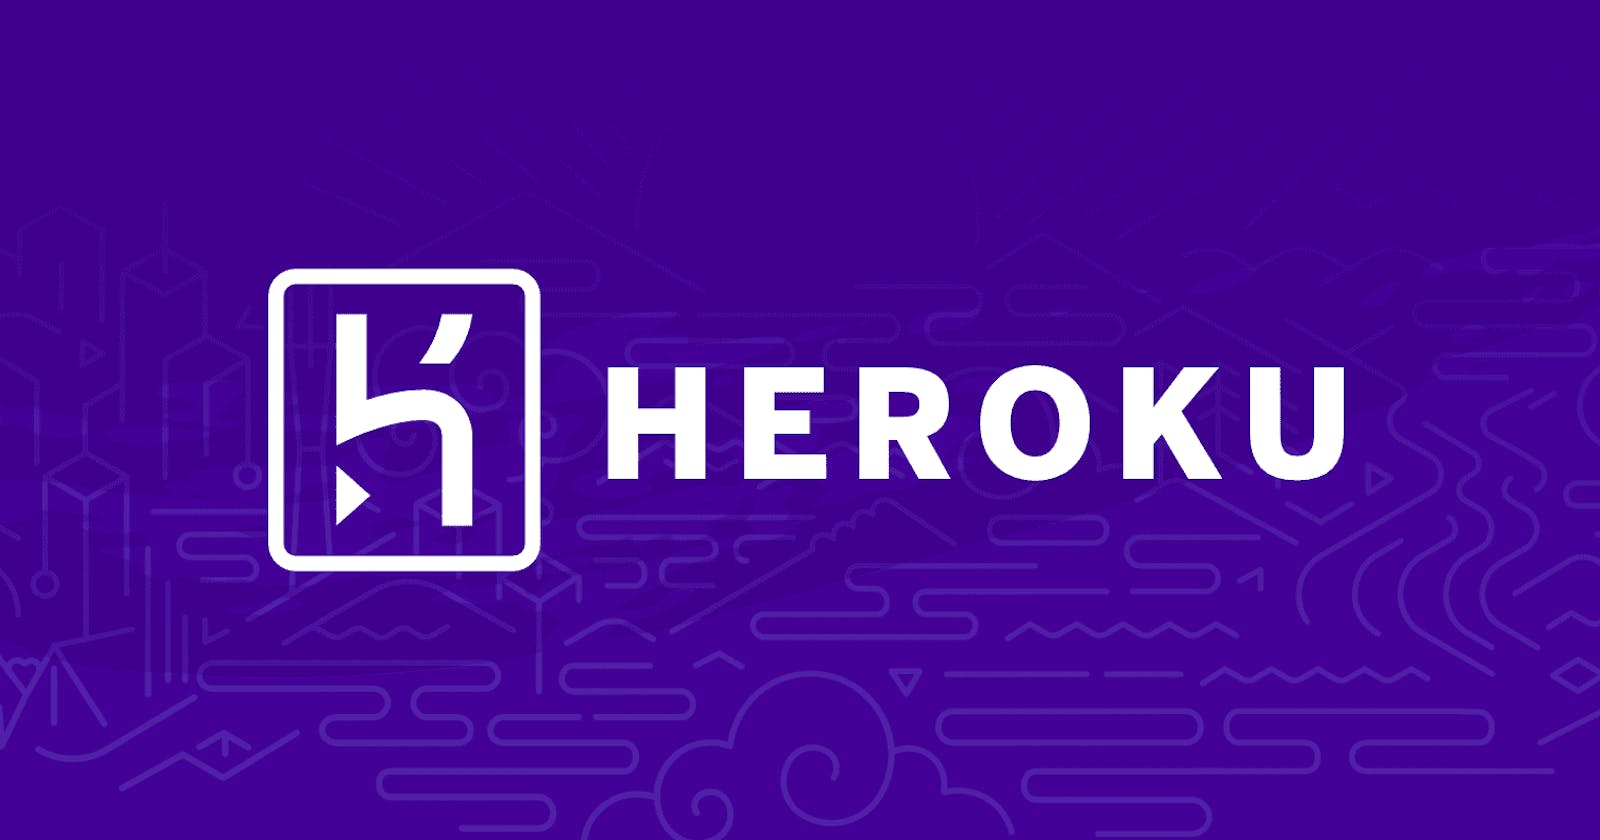 How to set up Continuous Delivery to Heroku